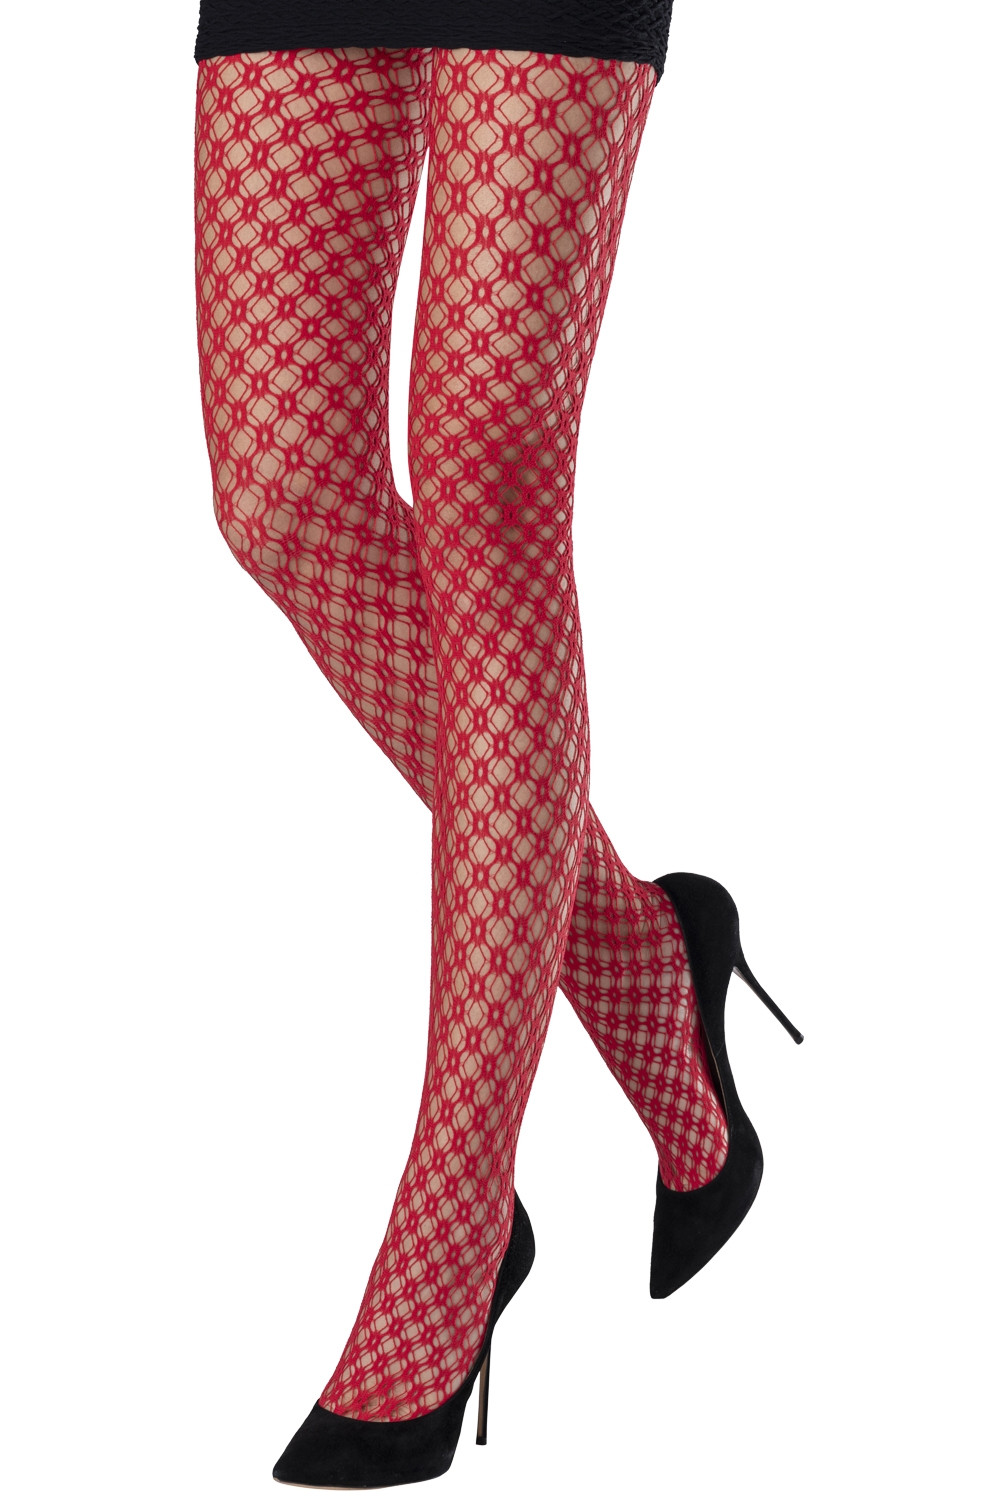 Patterned Stockings at UK Tights: Discover Unique Patterns